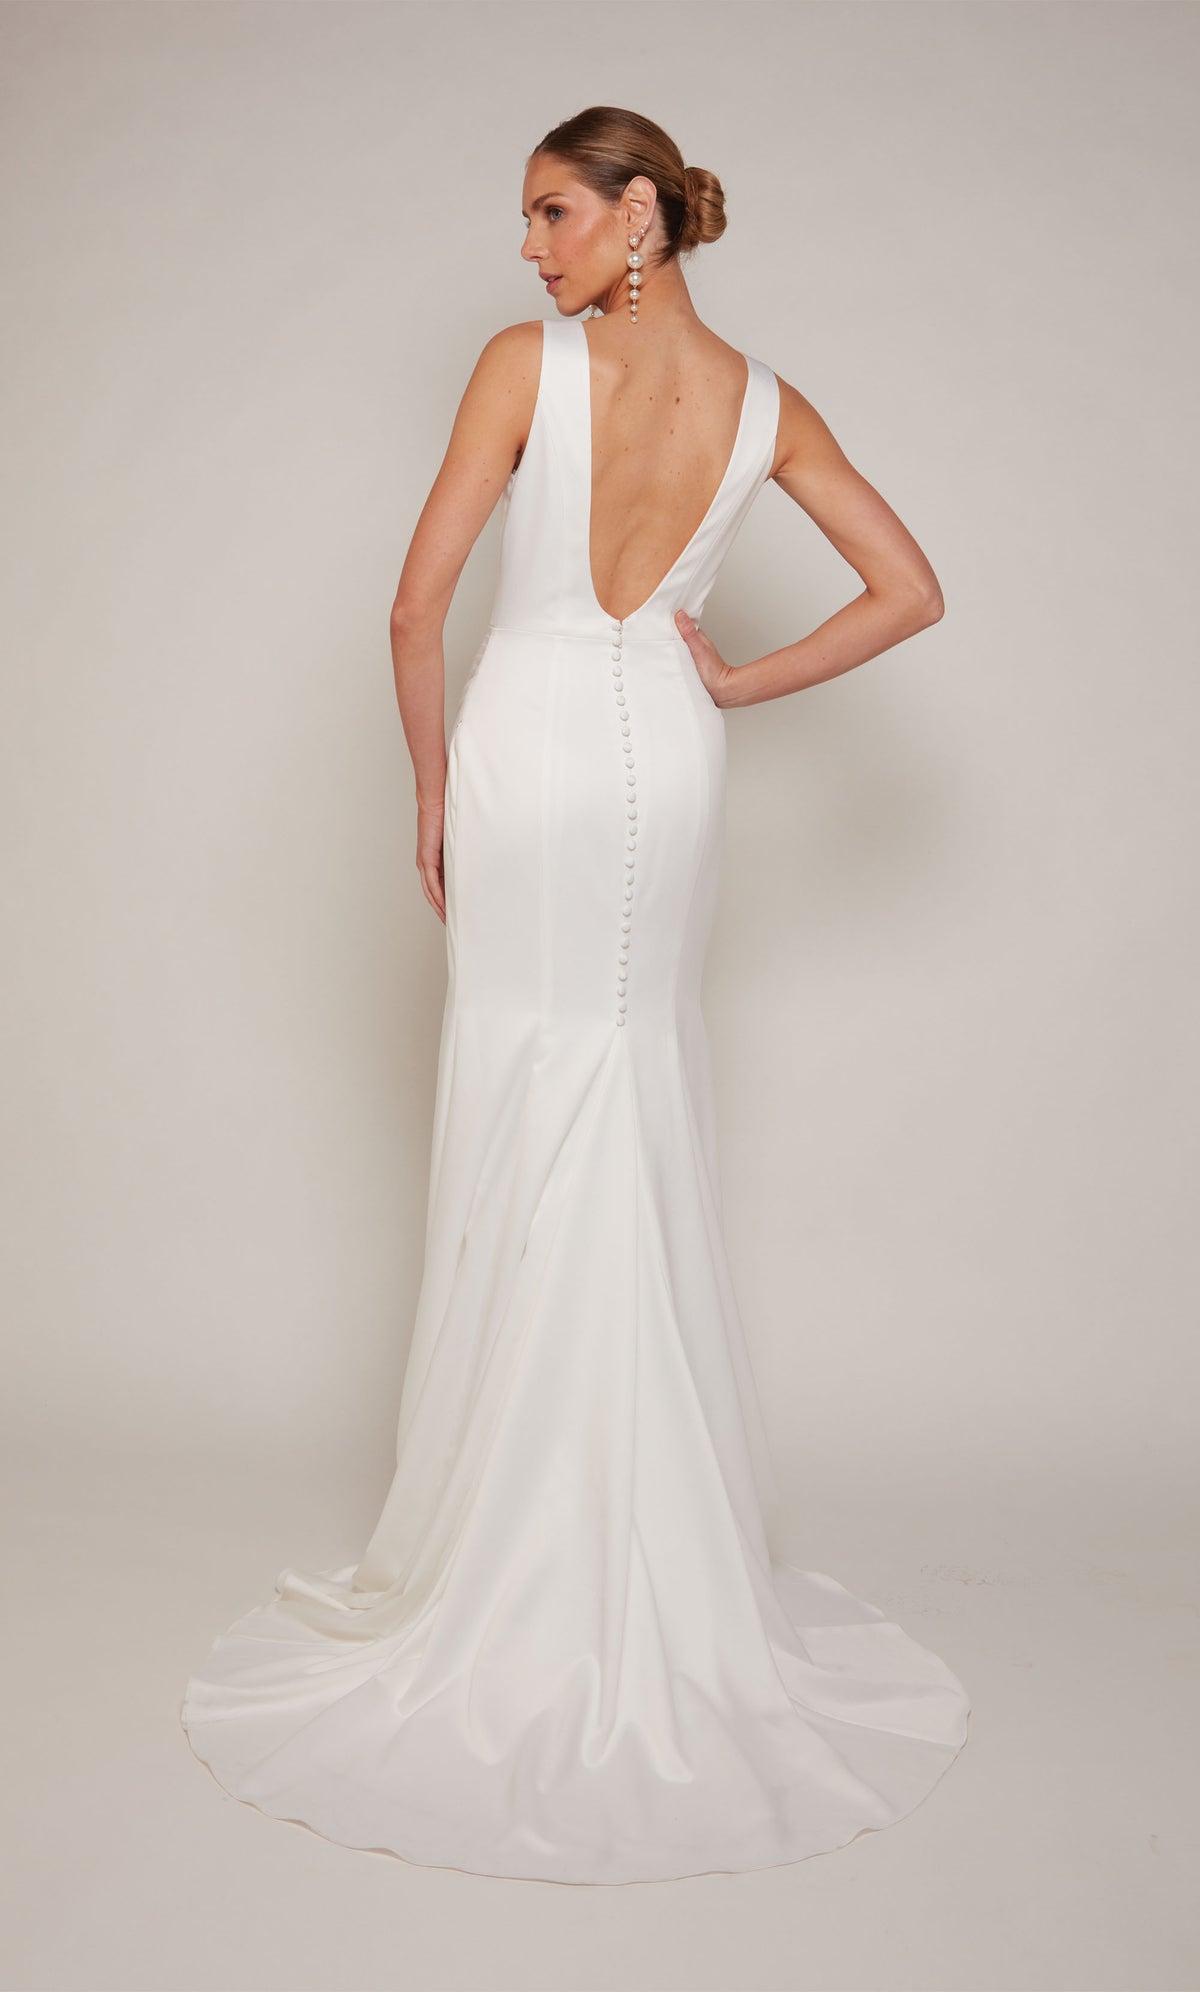 A white, satin wedding gown highlighting a V-shaped open back and train adorned with satin covered buttons.